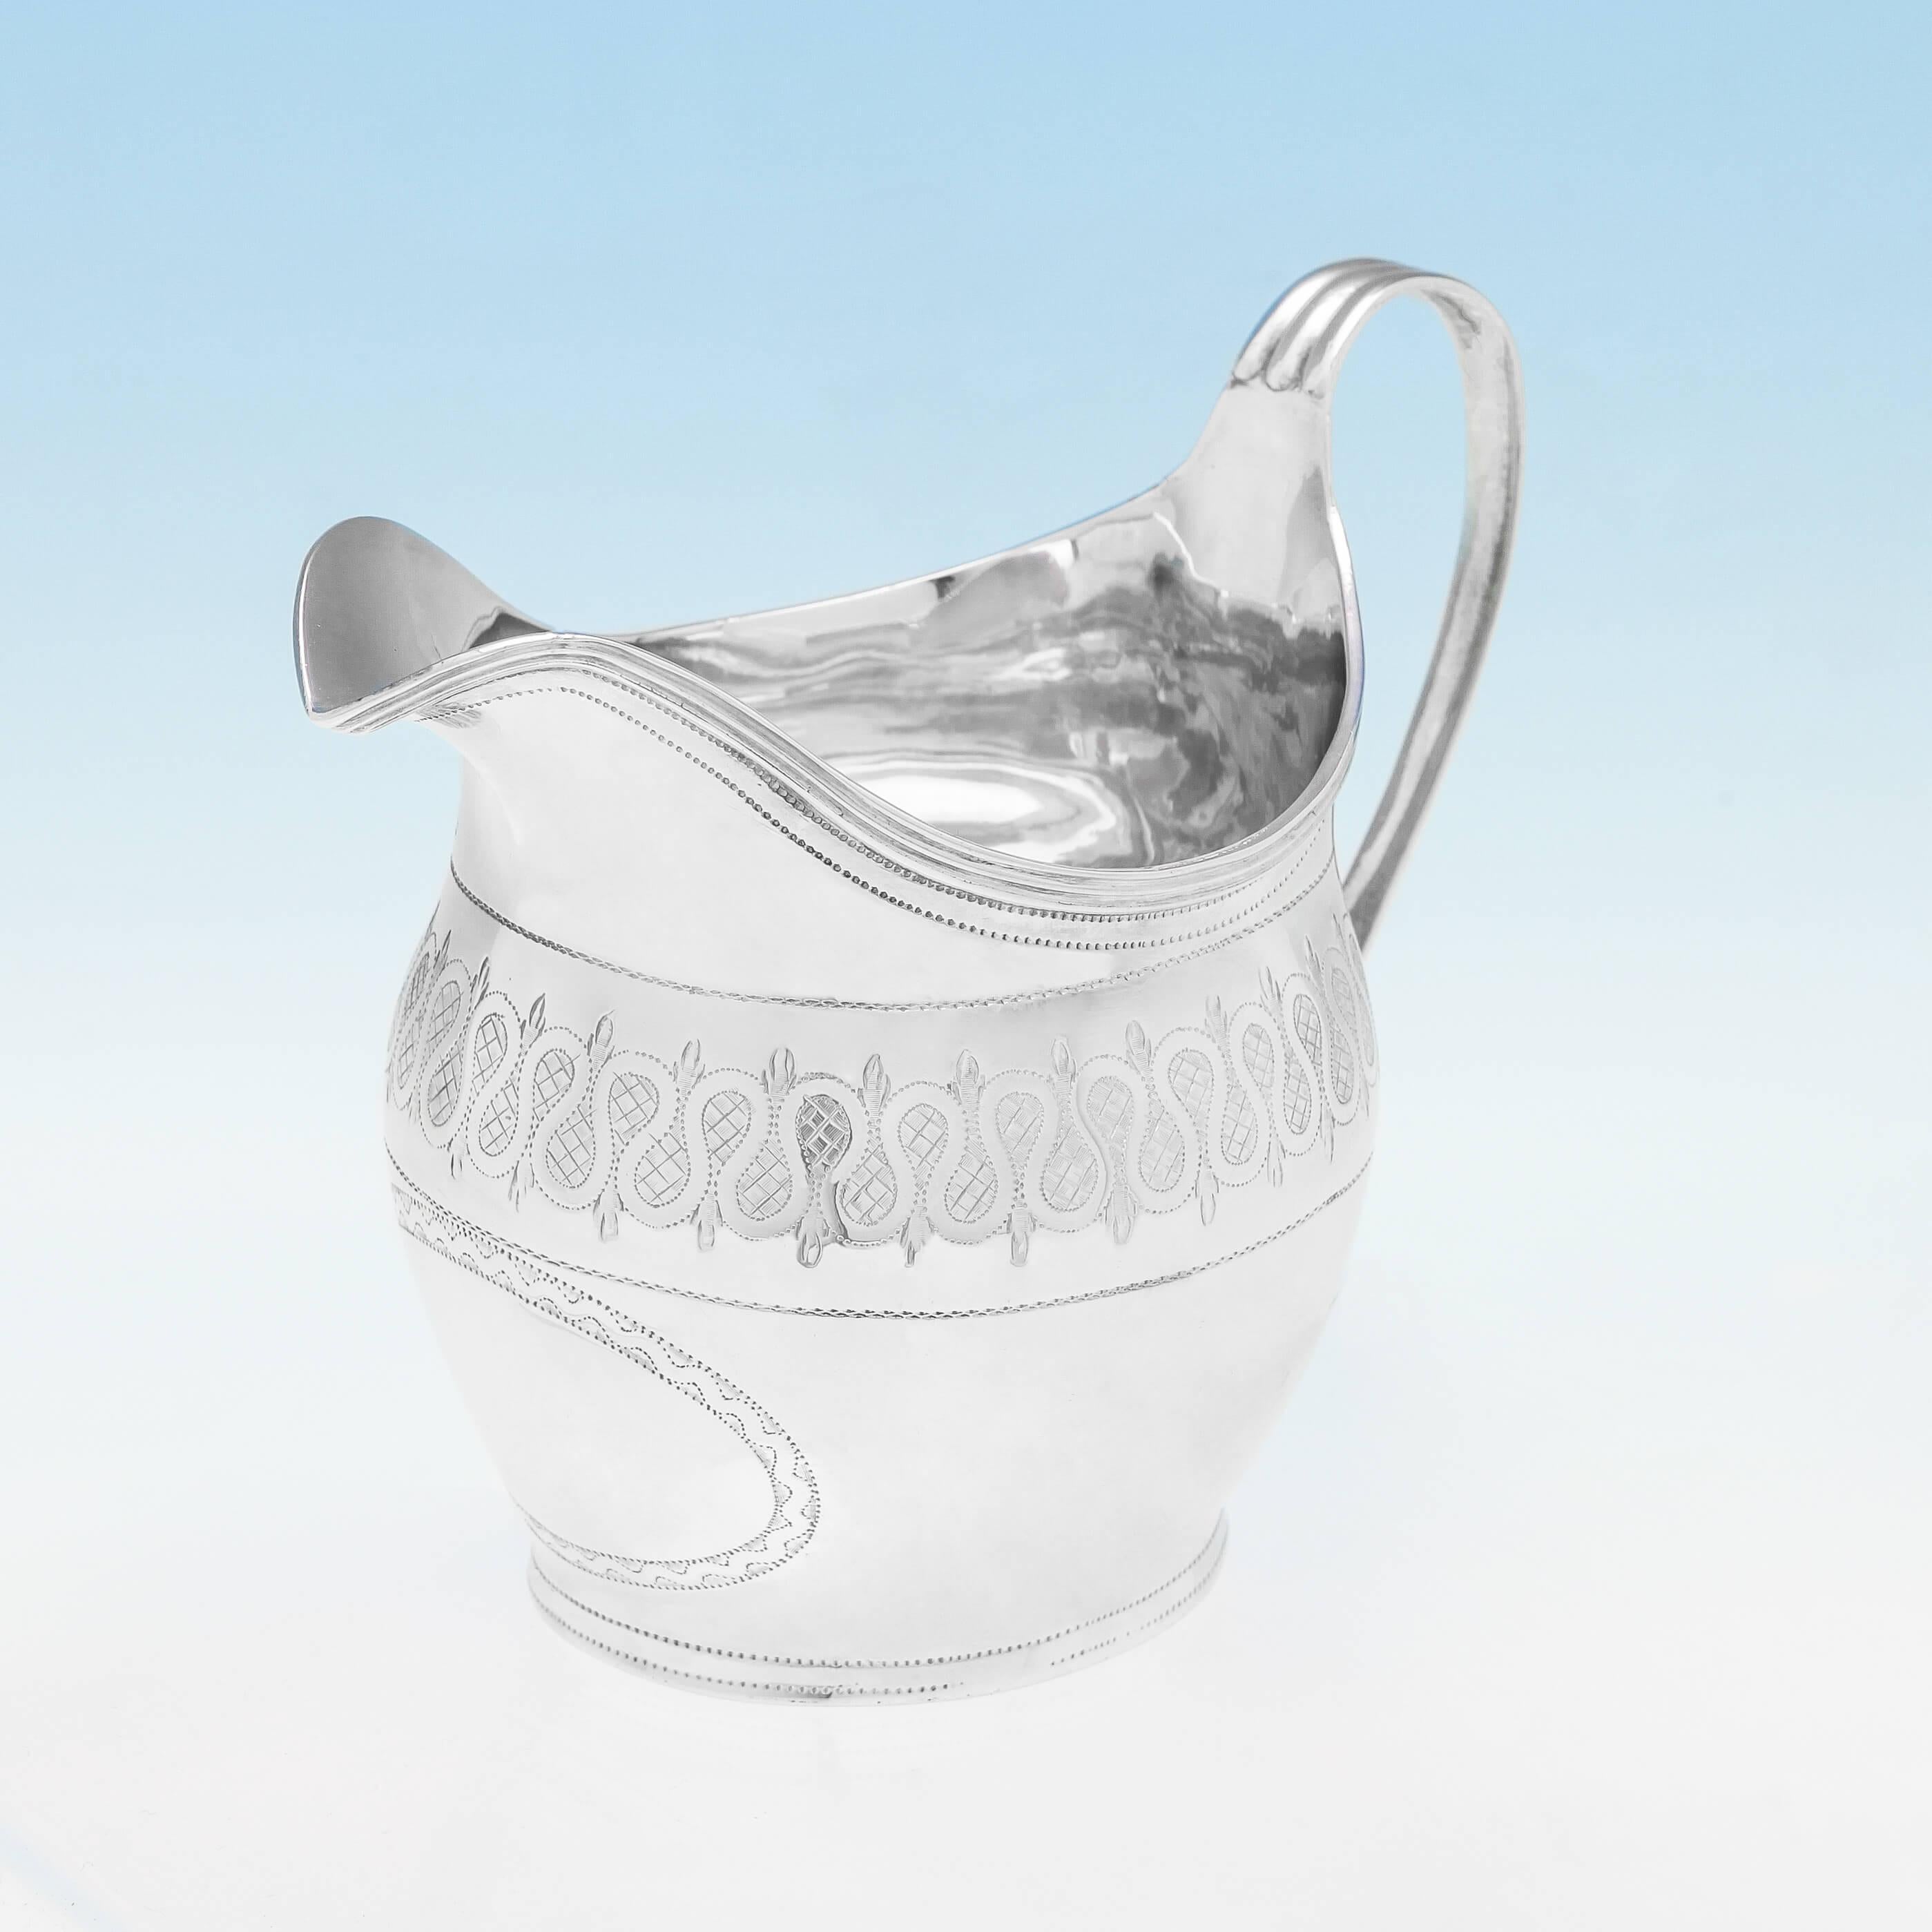 English George III Engraved Antique Sterling Silver Cream Jug from London in 1808